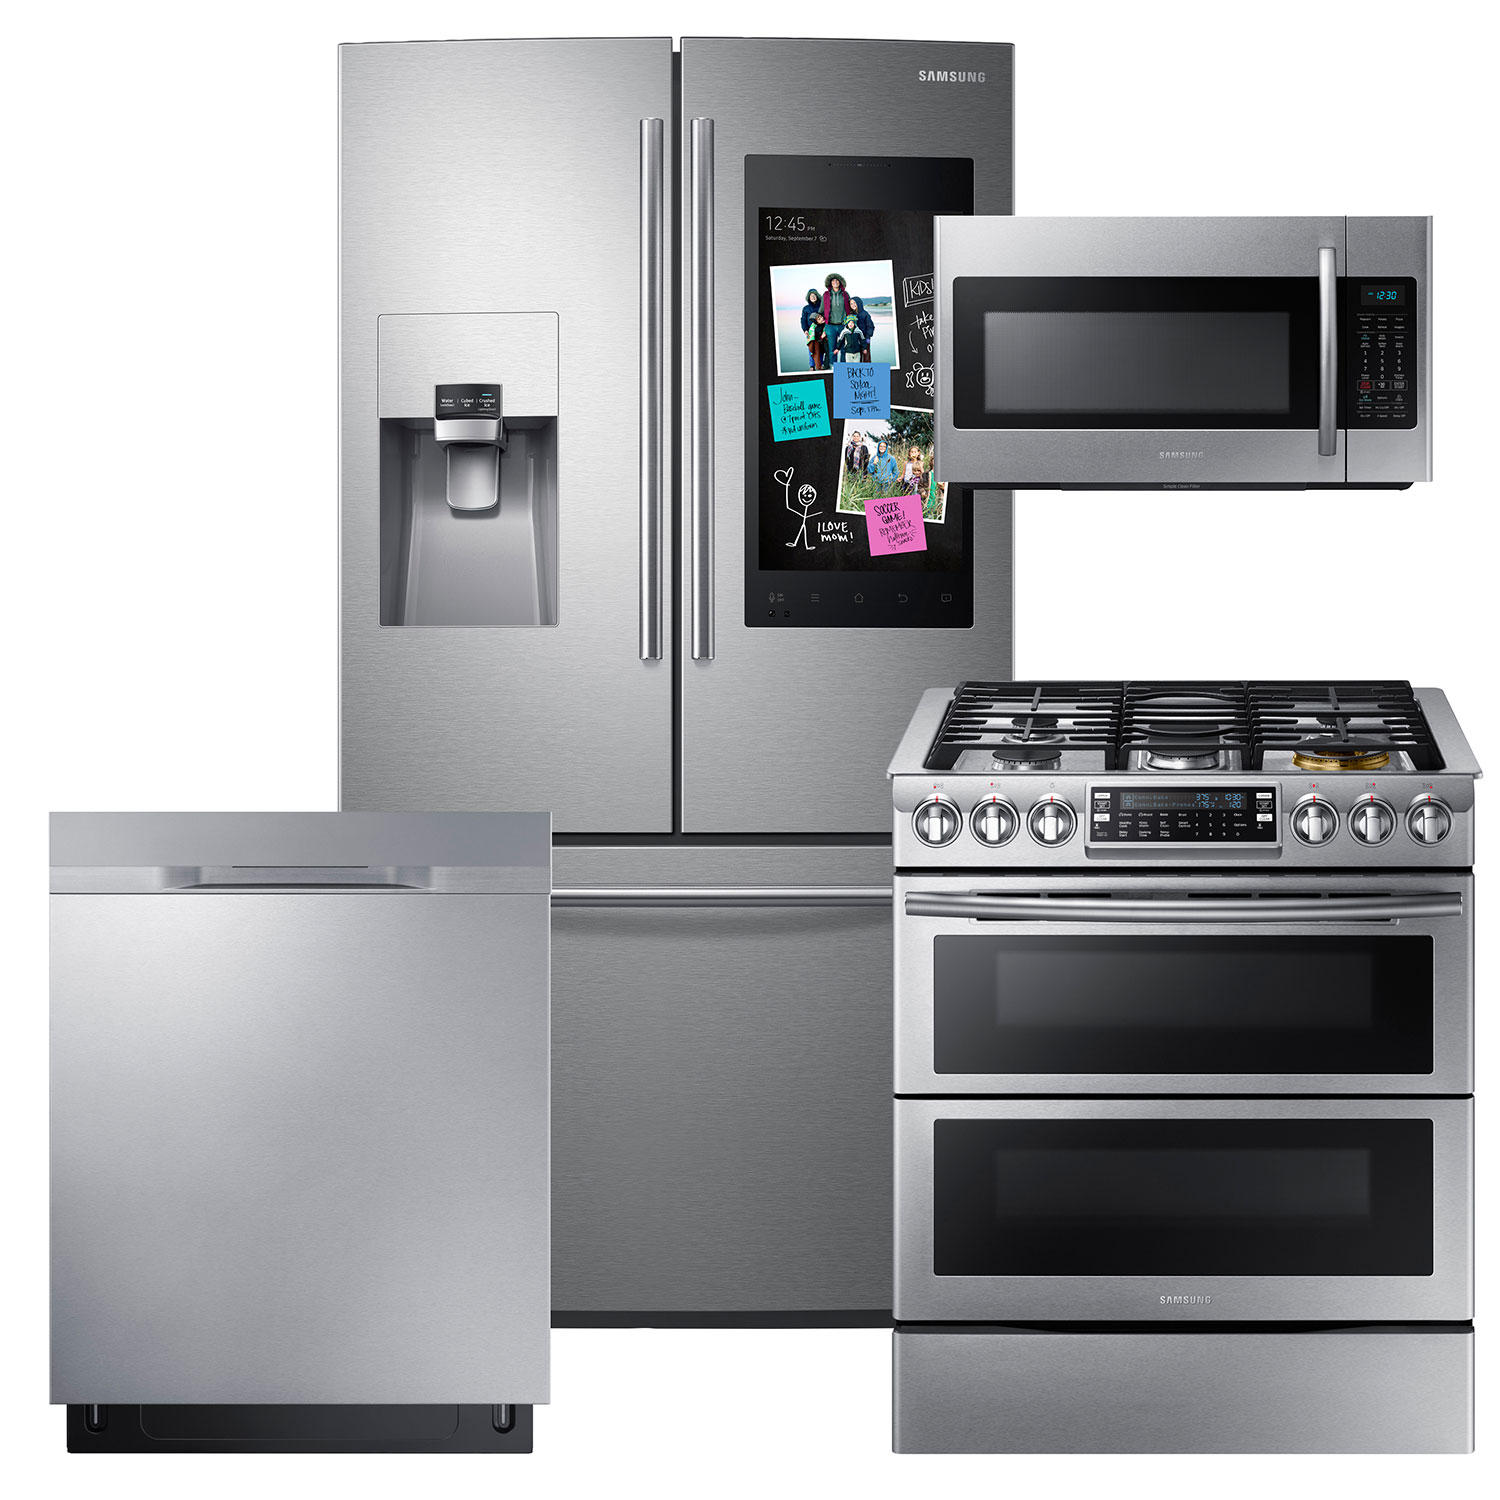 SAMSUNG Family Hub Refrigerator, Slide-In Gas Flex Duo Range , Microwave, and Dishwasher Package in Black Stainless Steel Finish